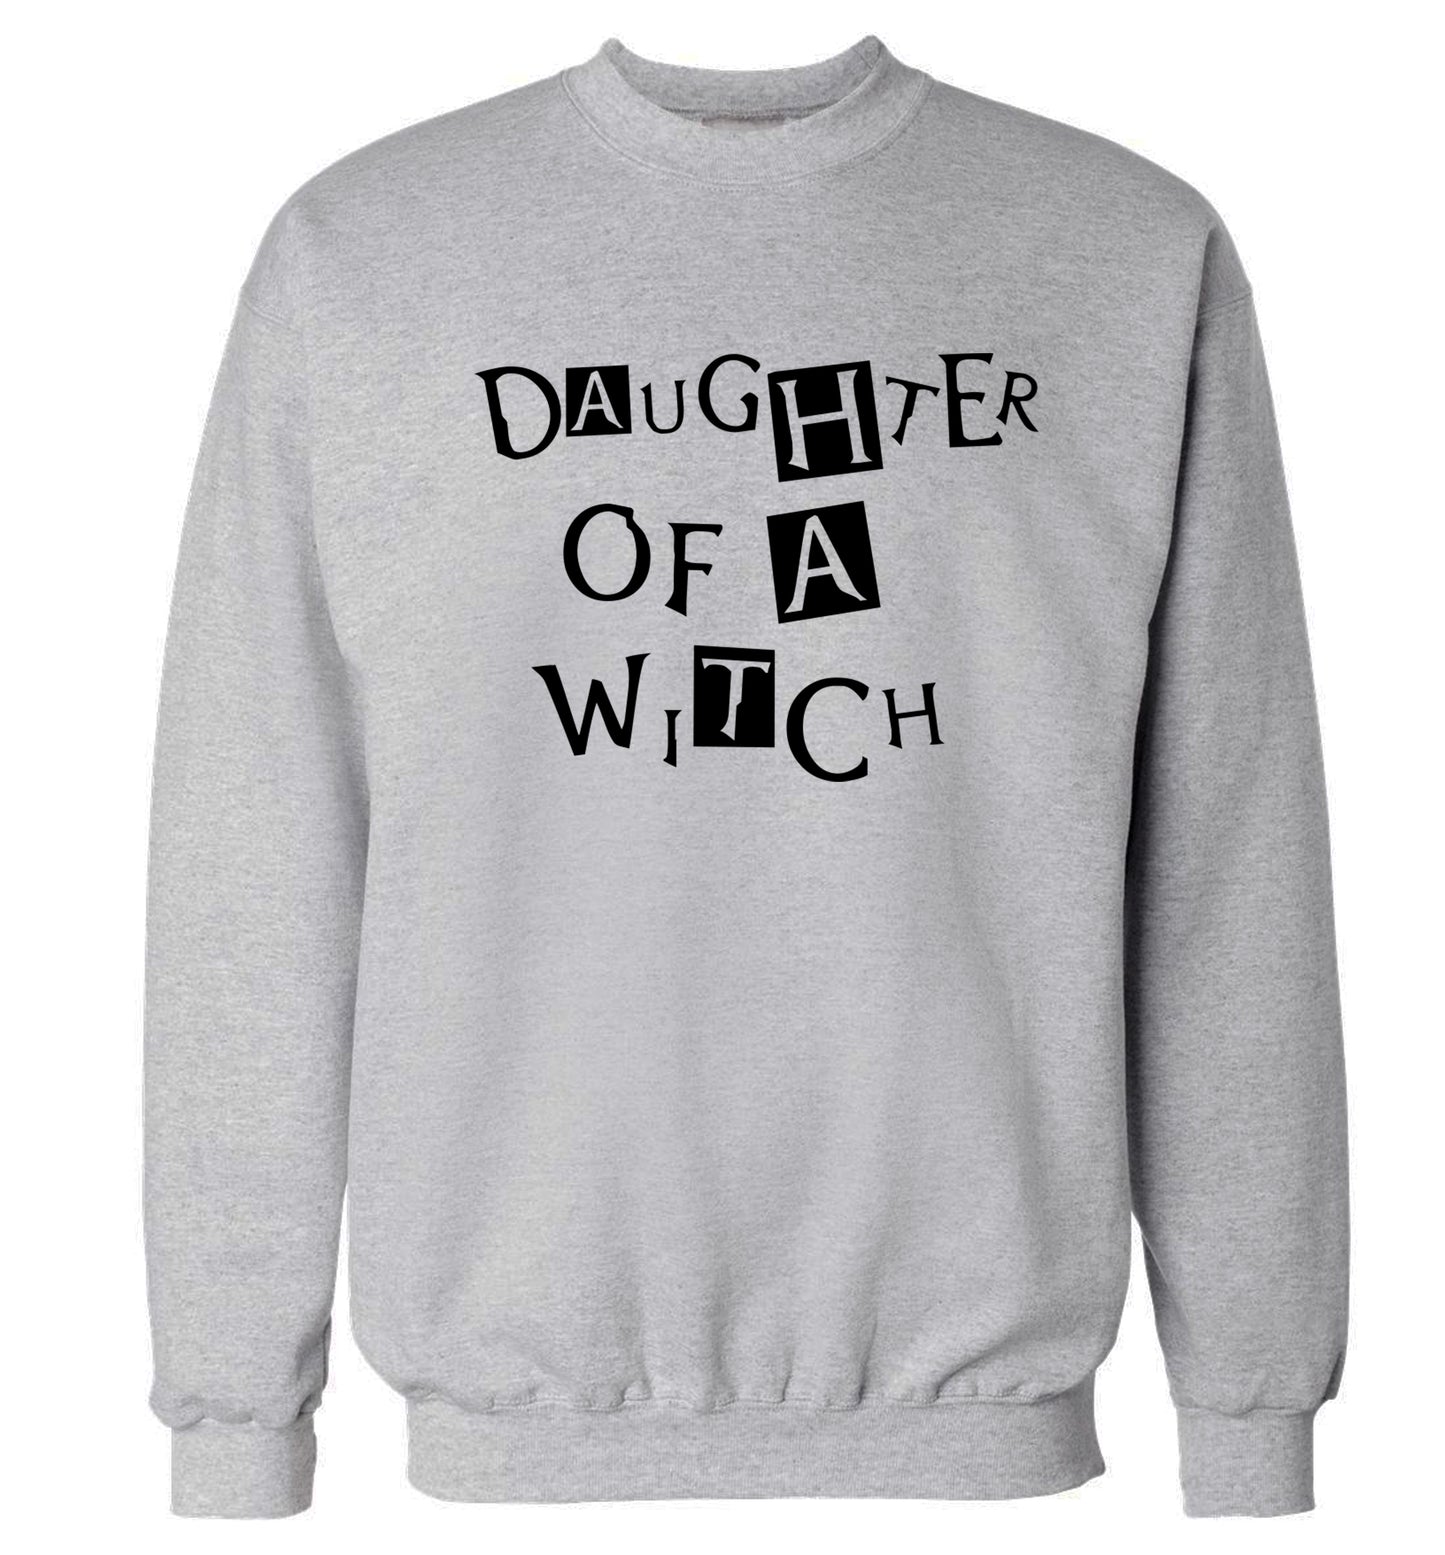 Daughter of a witch Adult's unisex grey Sweater 2XL